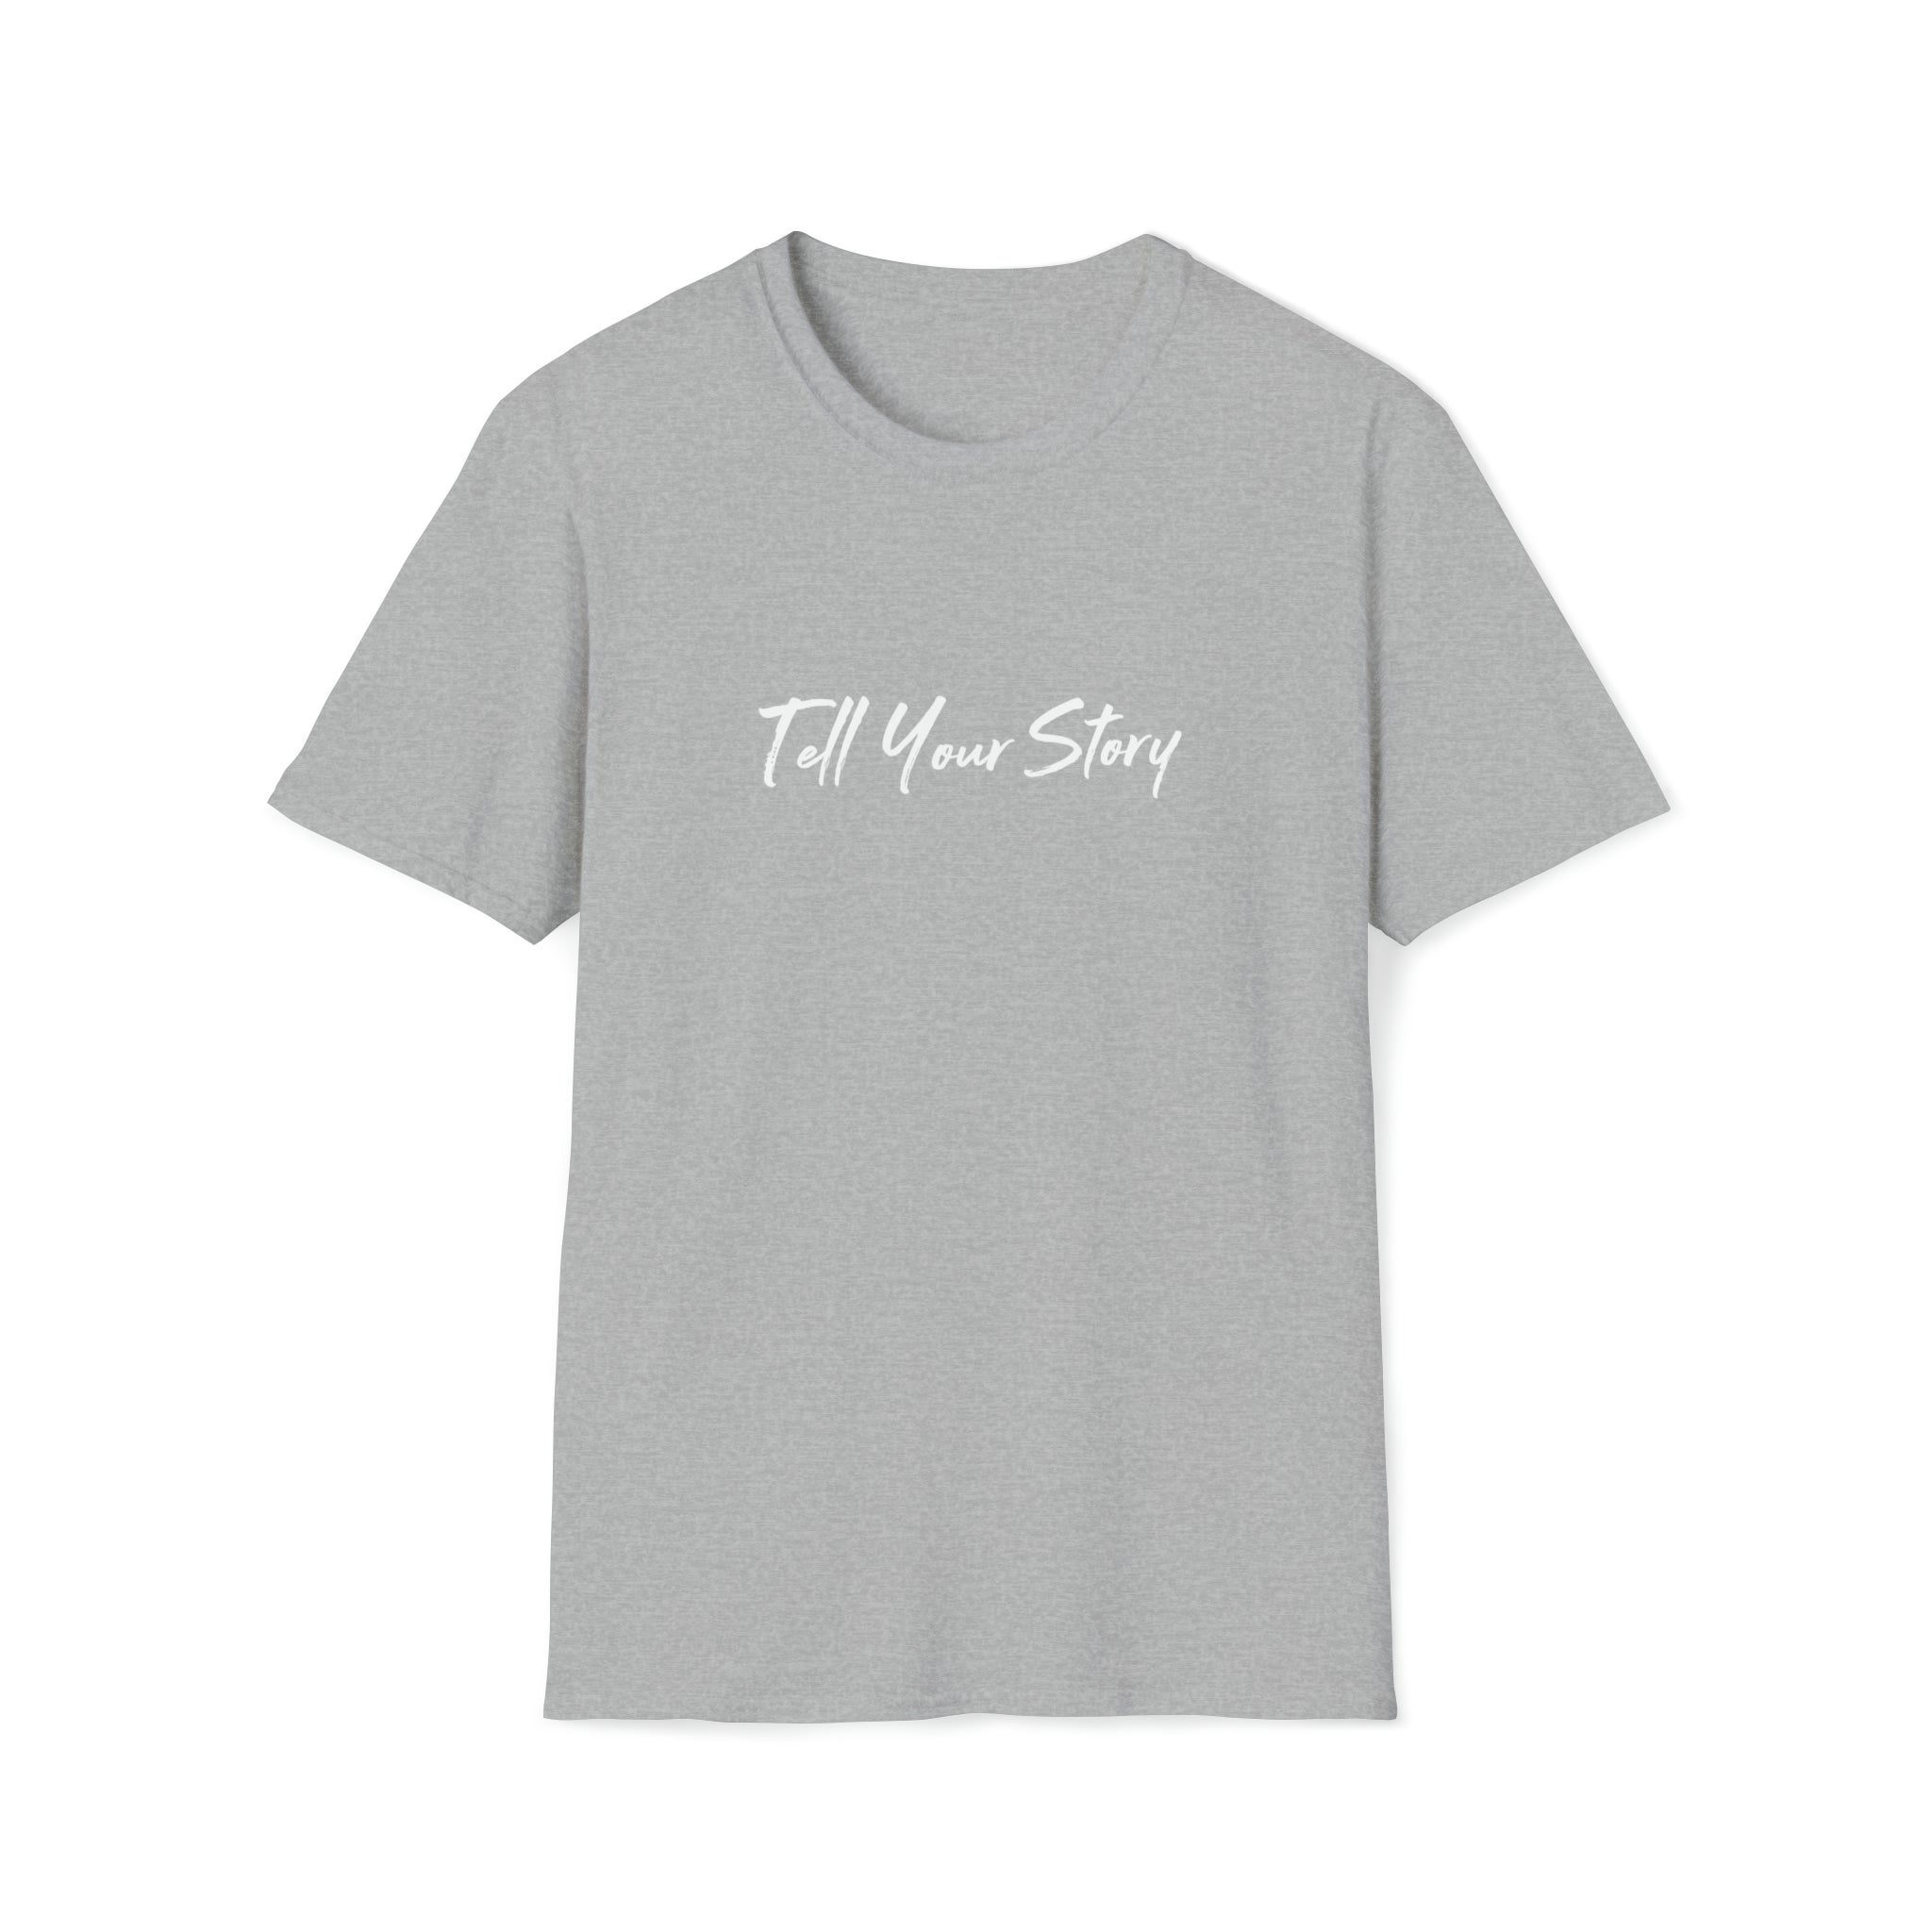 Tell Your Story Unisex Softstyle T-Shirt